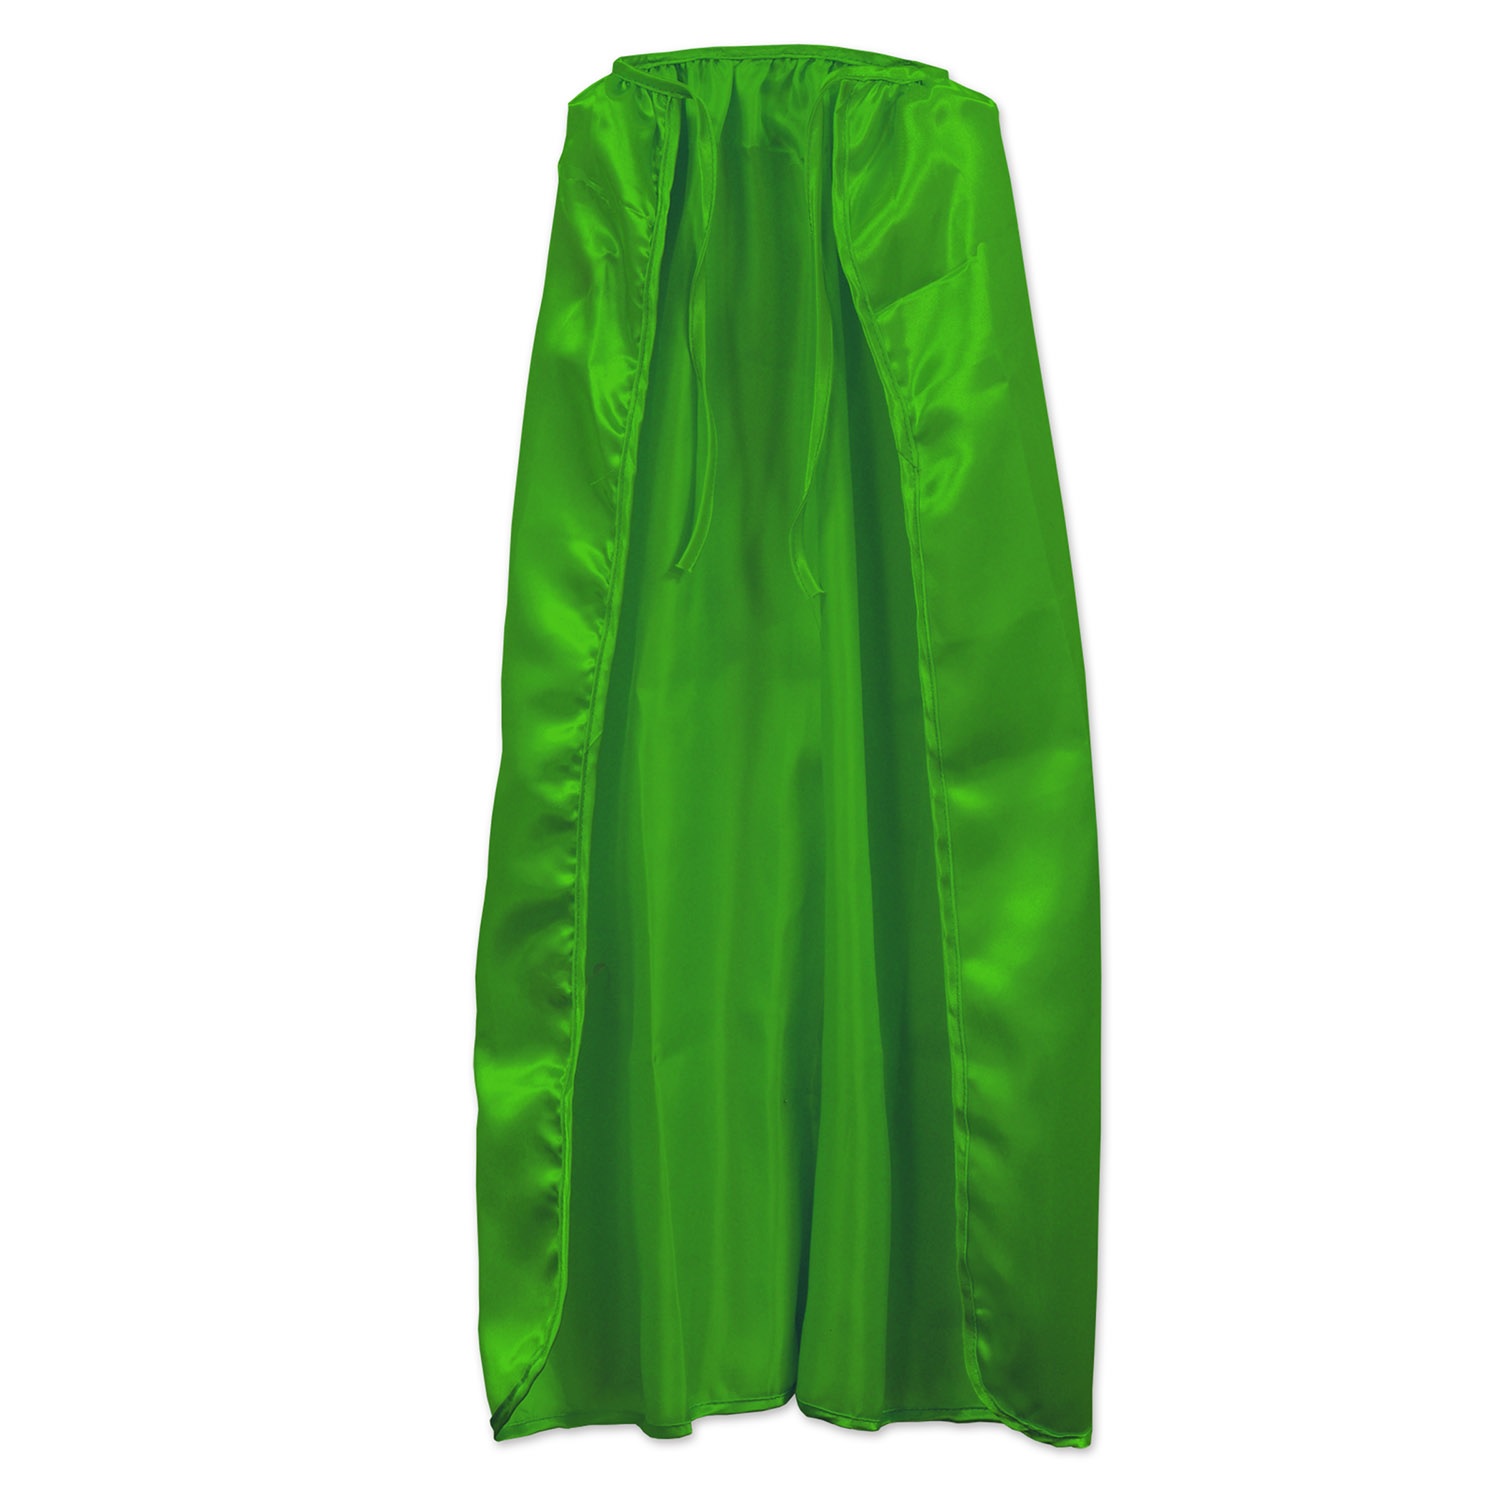 Beistle Club Pack of 12 Halloween Green Super Hero Capes 30"